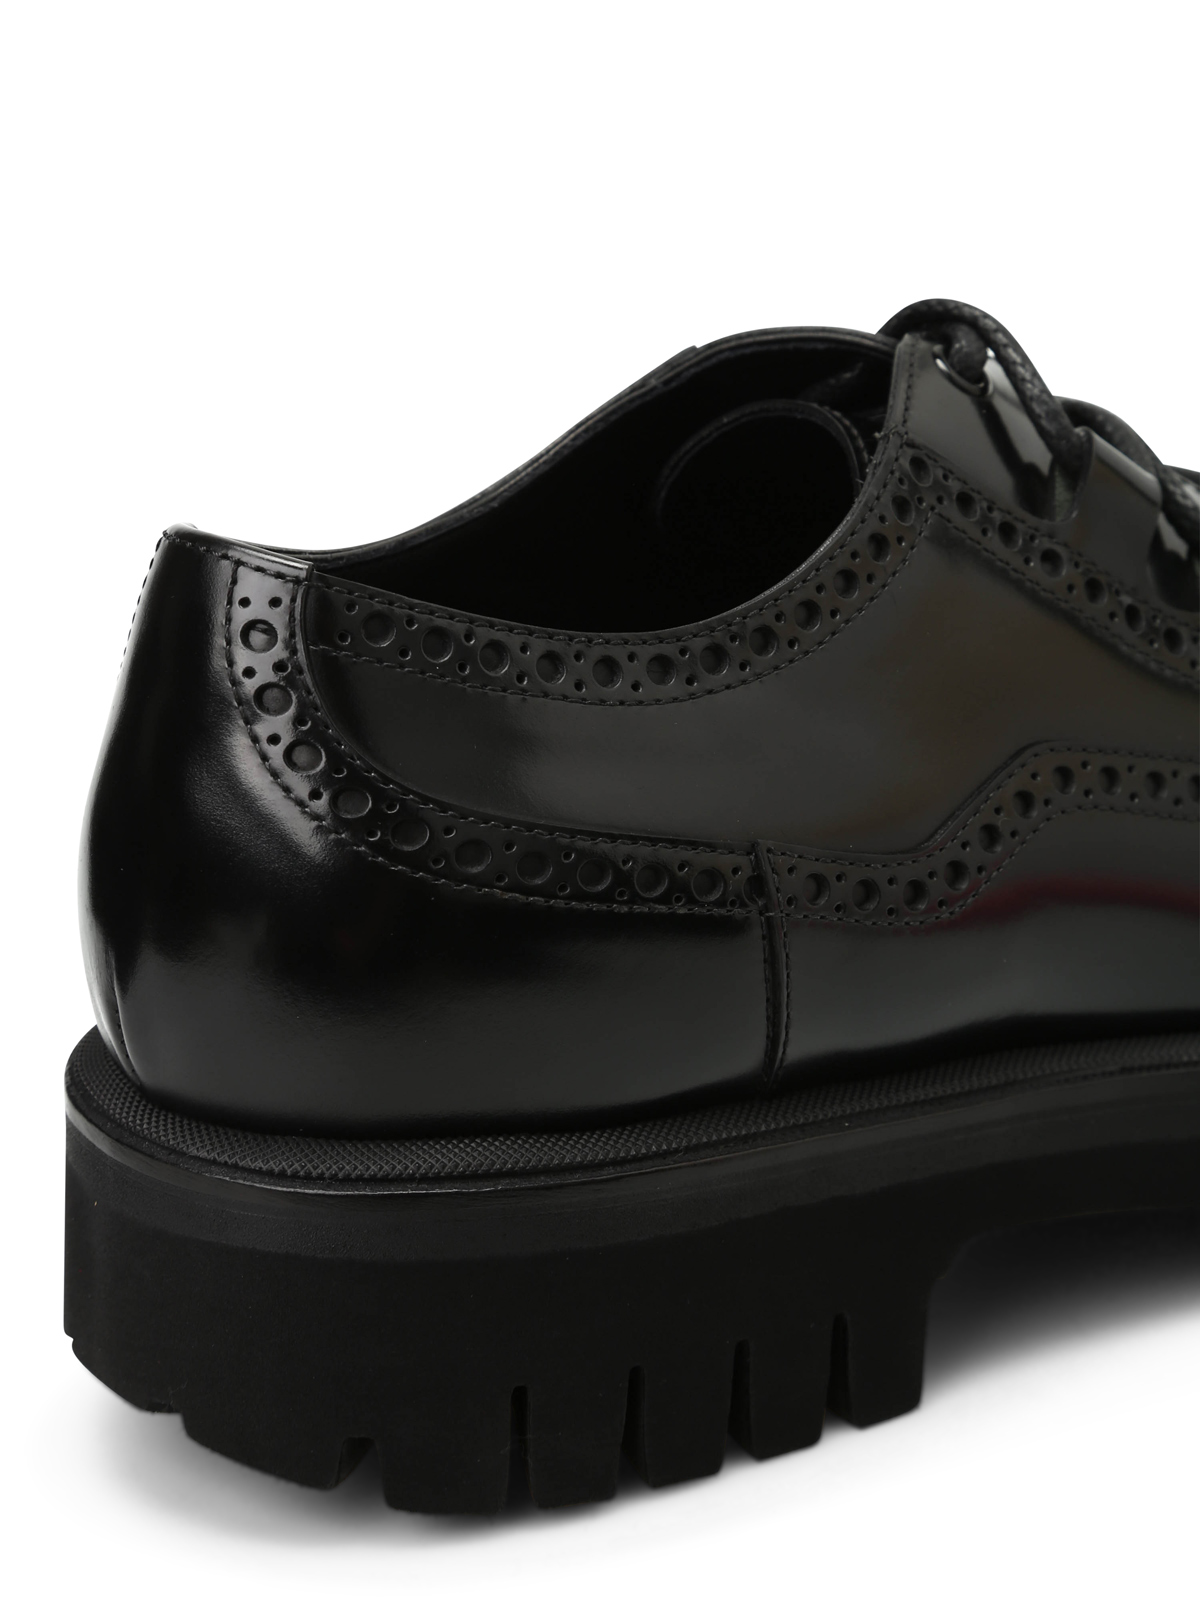 dolce and gabbana shoes online